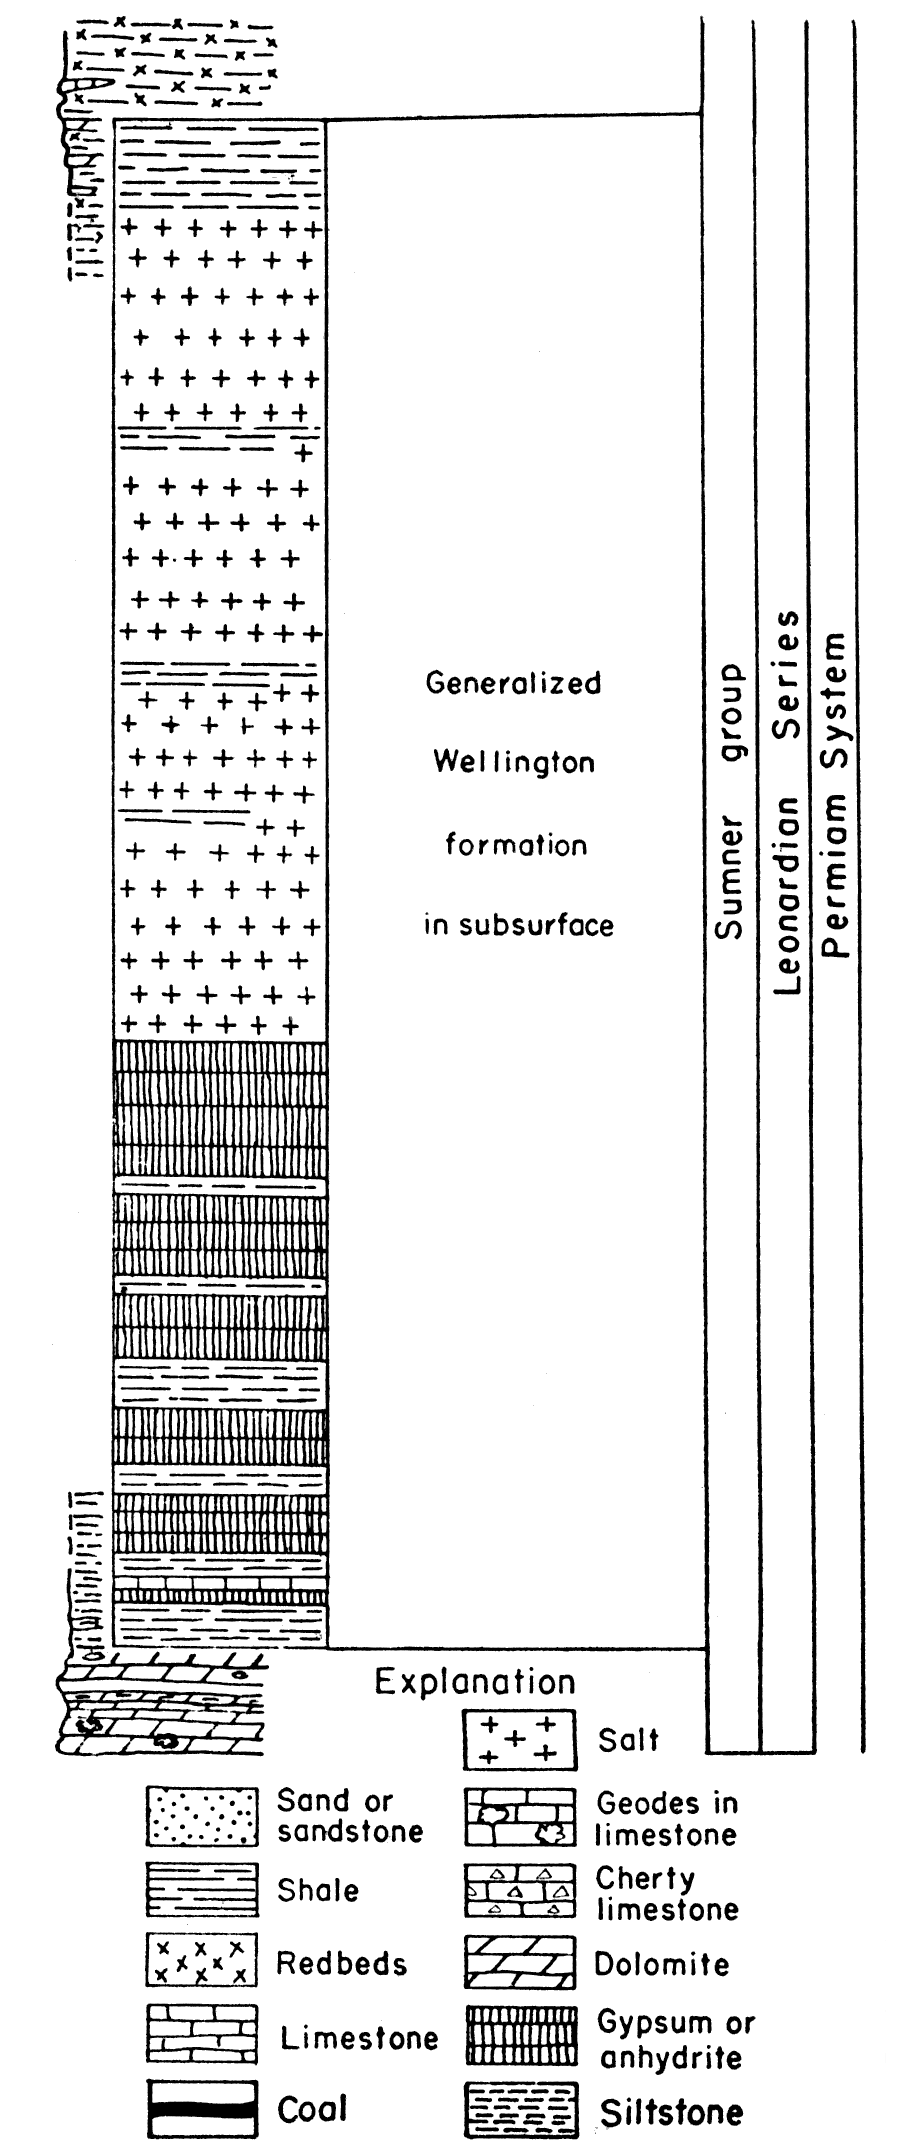 Generalized stratigraphic section of Permian rocks in Kansas. Note that the Wellington rocks are represented as subsurface rocks.